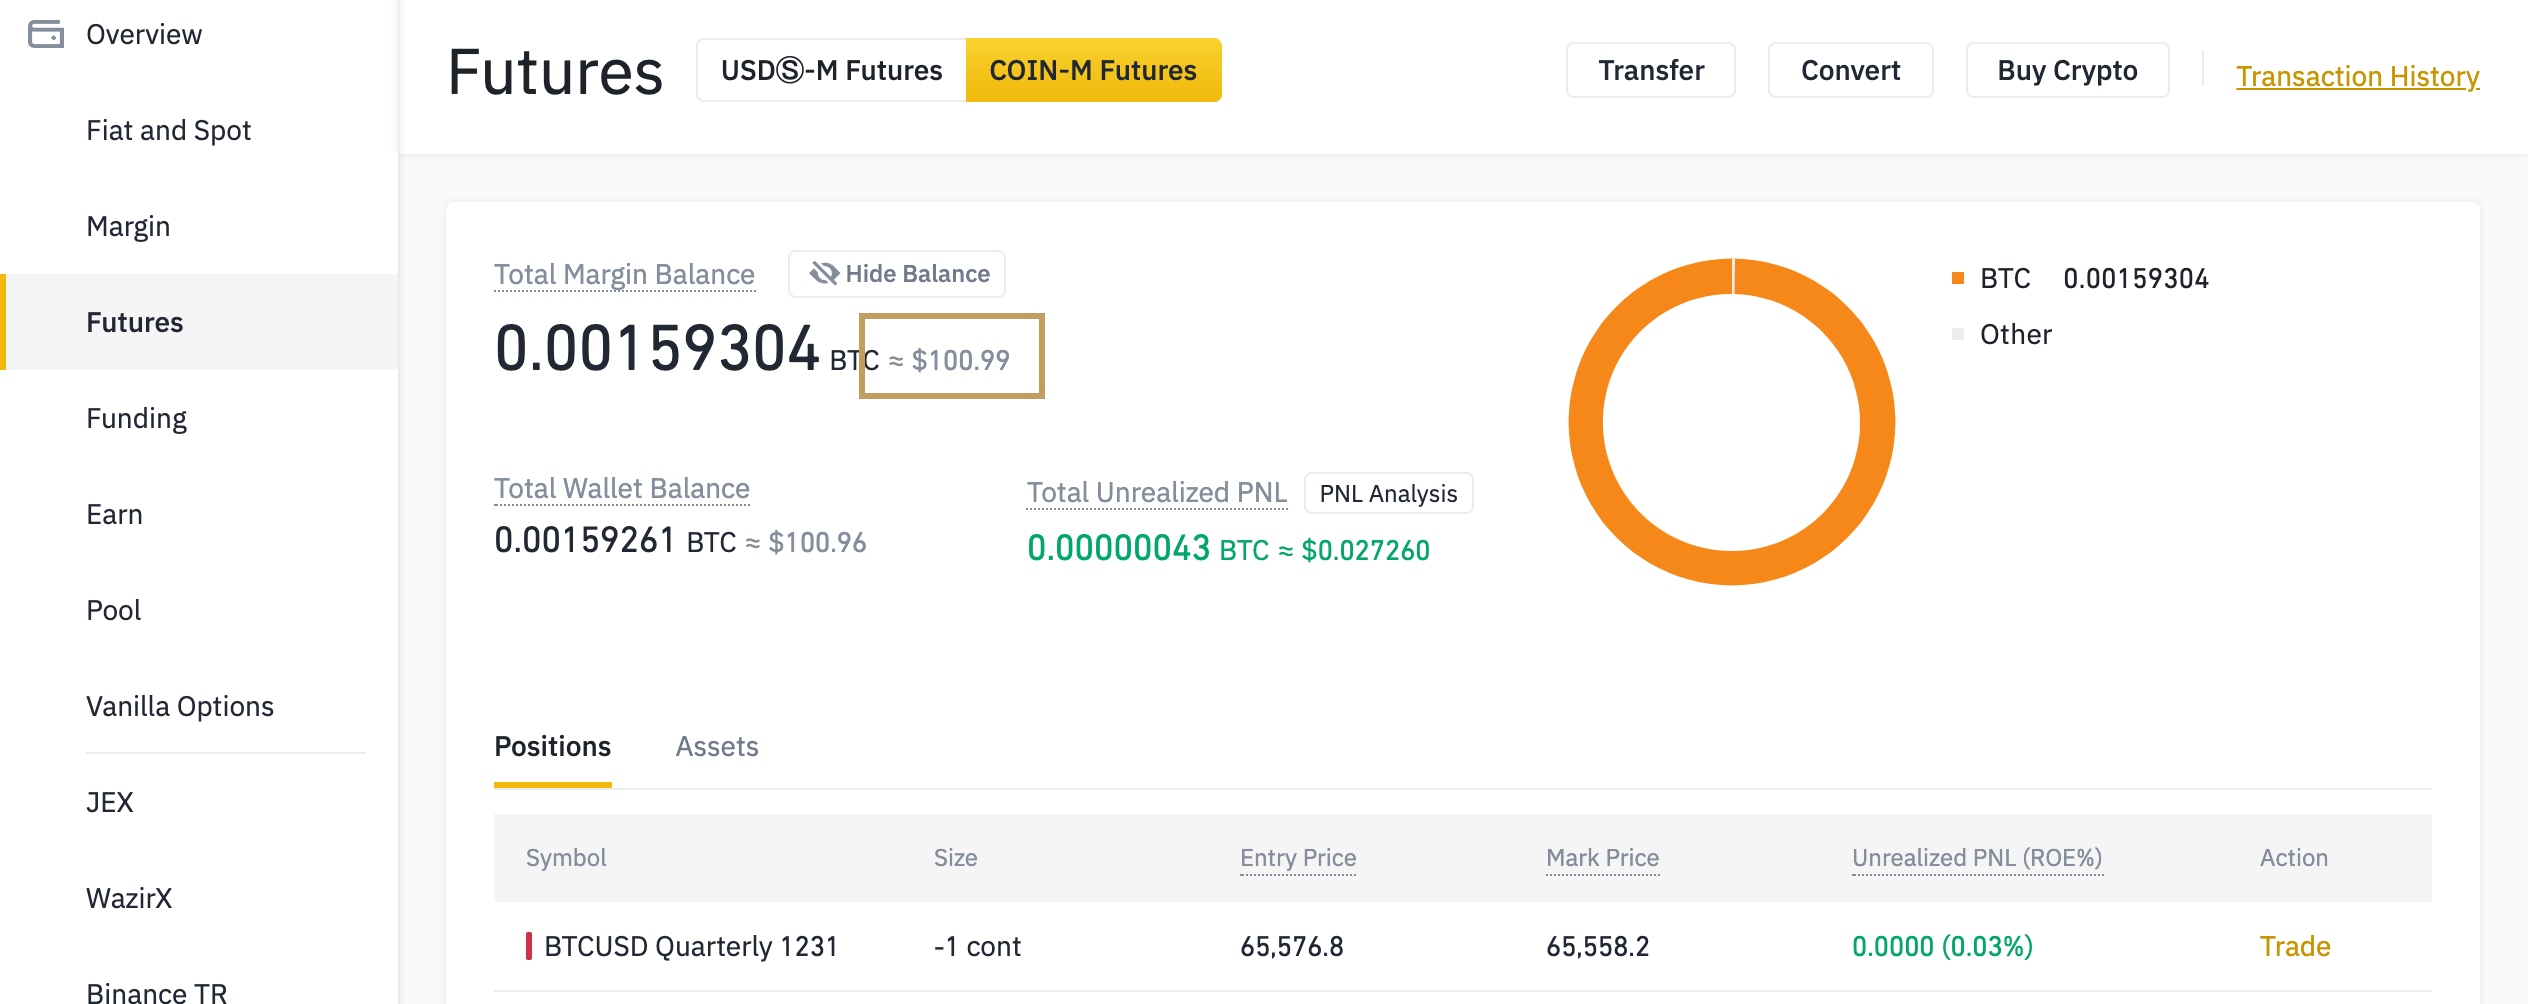 Futures Wallet on Binance. The Coin-M Futures Wallet has a total value of $100.99. The Total Unrealized Gain with Futures has a gain of 2 cents after entering the contango price situation.